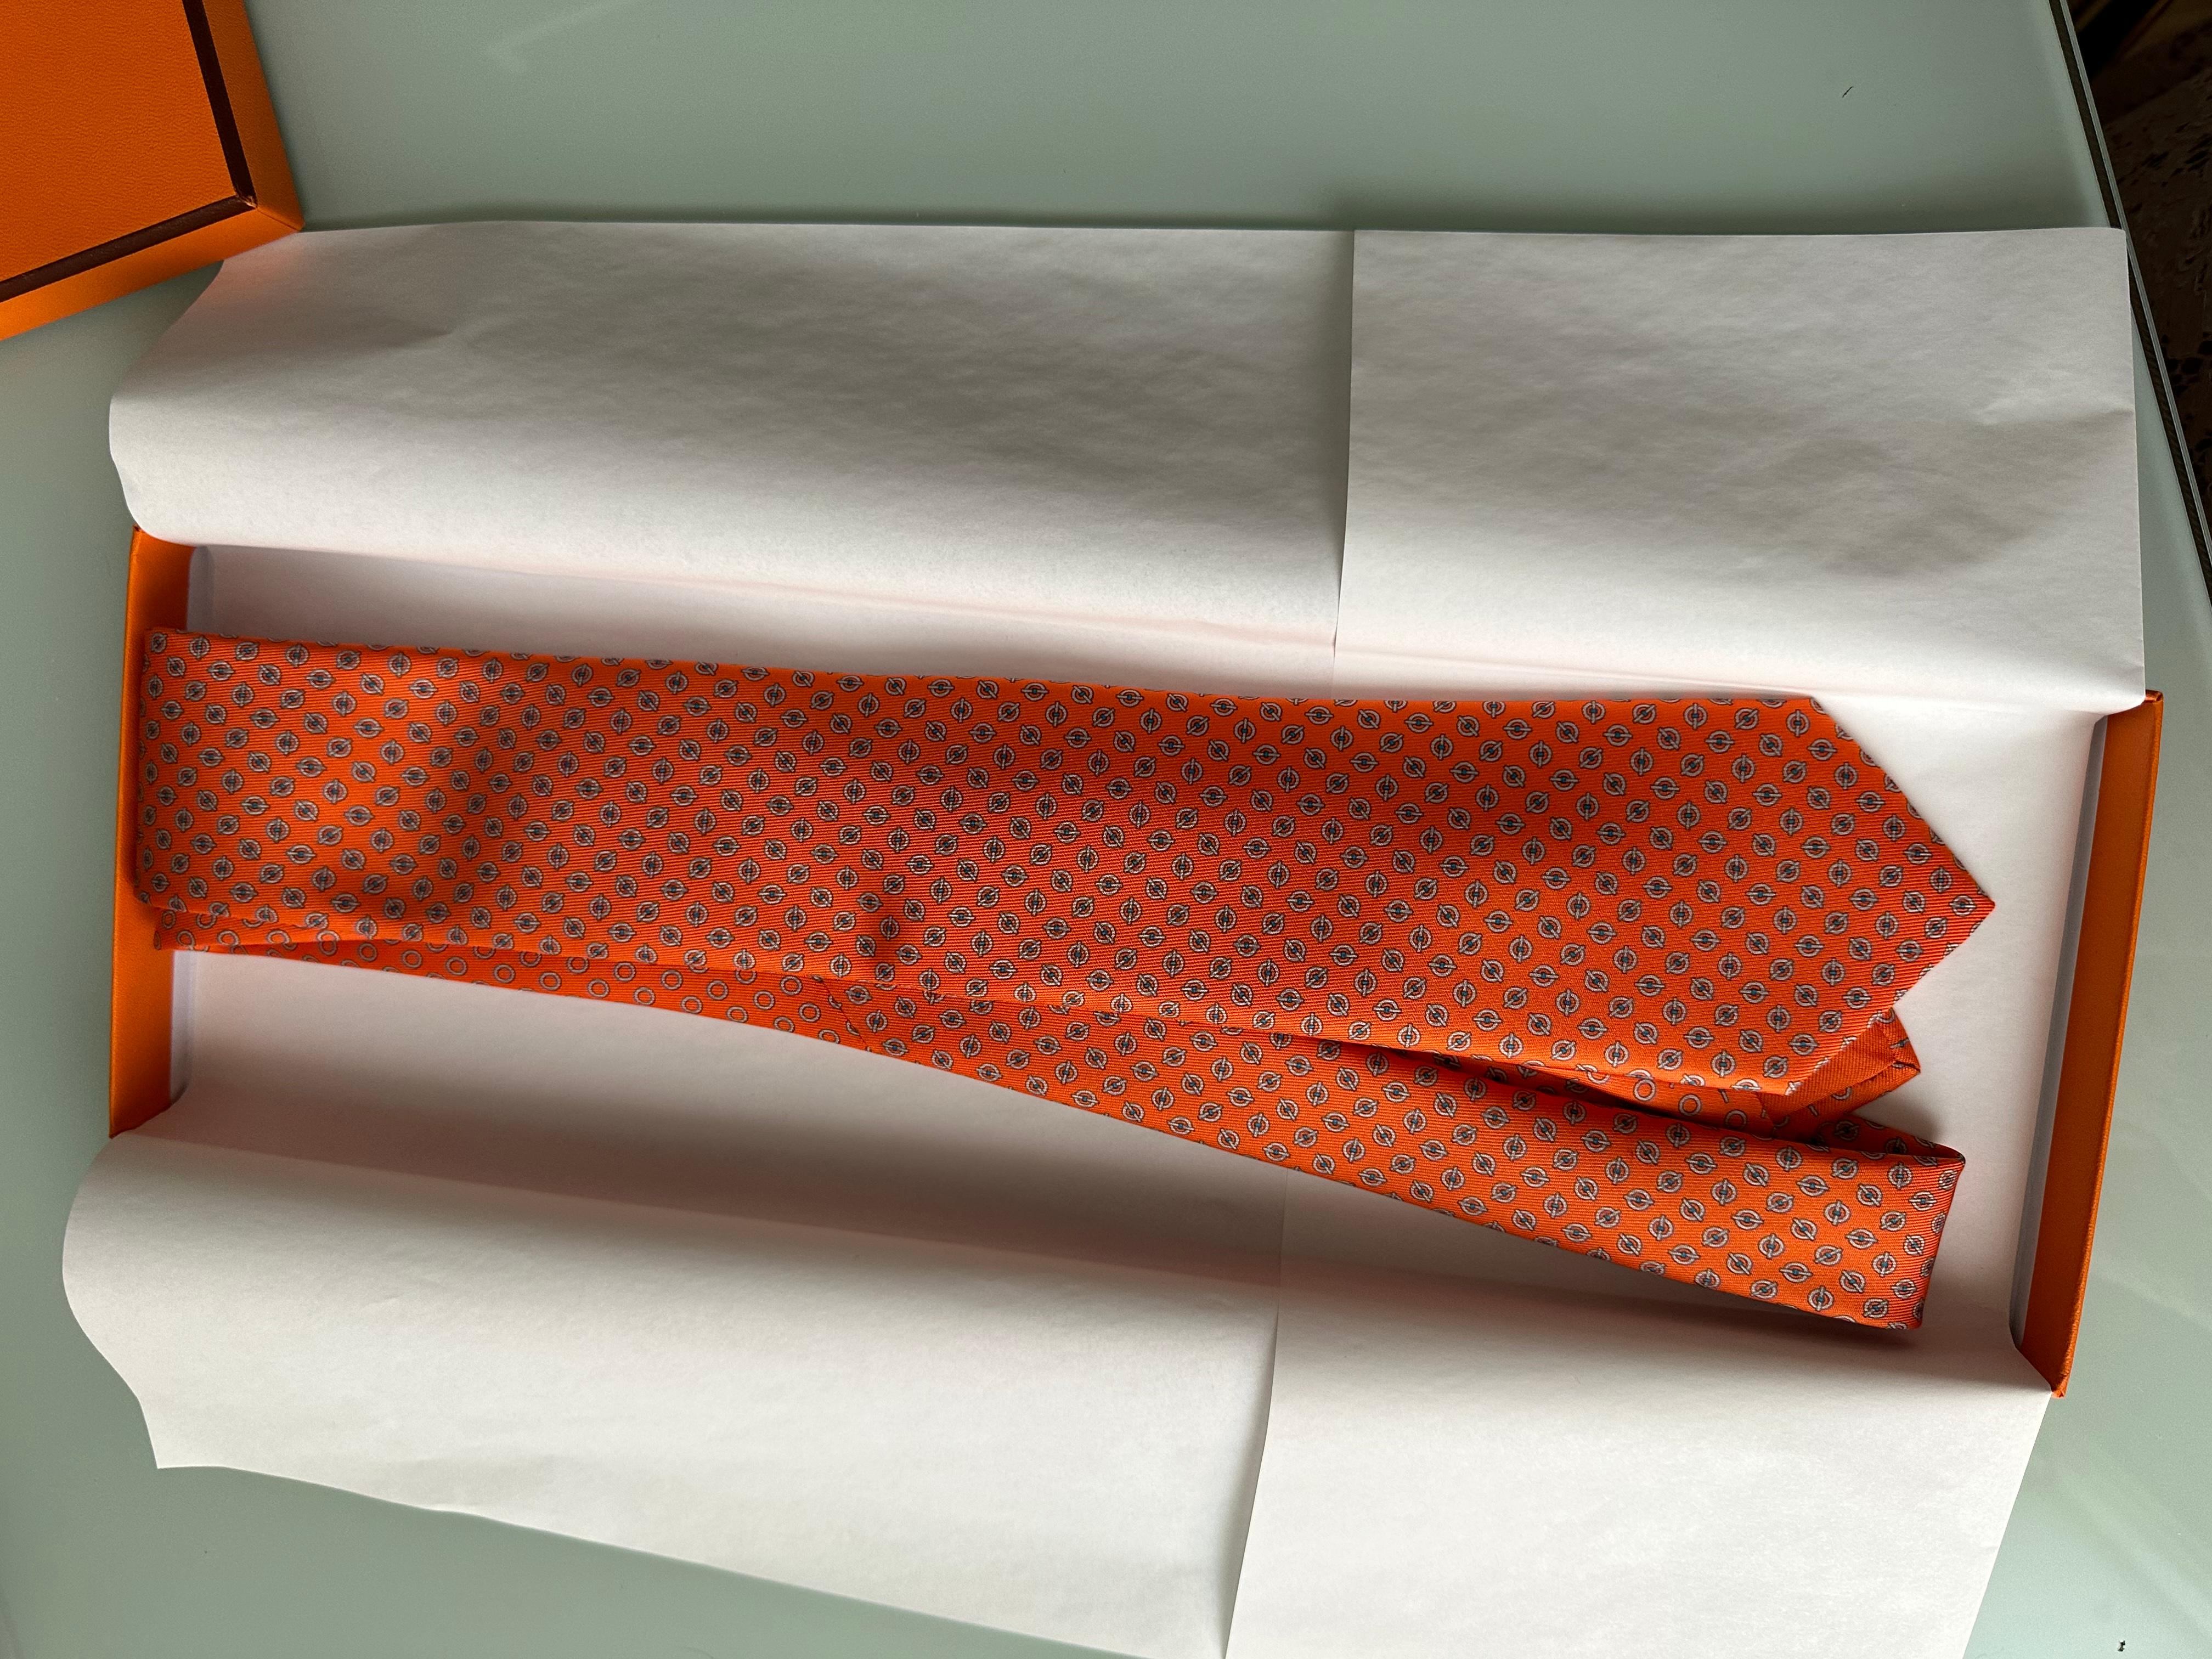 Hermes Tie in hand-sewn silk twill (100% silk)

The perfect tie to take you from city to coast!

The tail reveals a different motif.

Made in France
Designed by Philippe Mouquet
Width: 7 cm